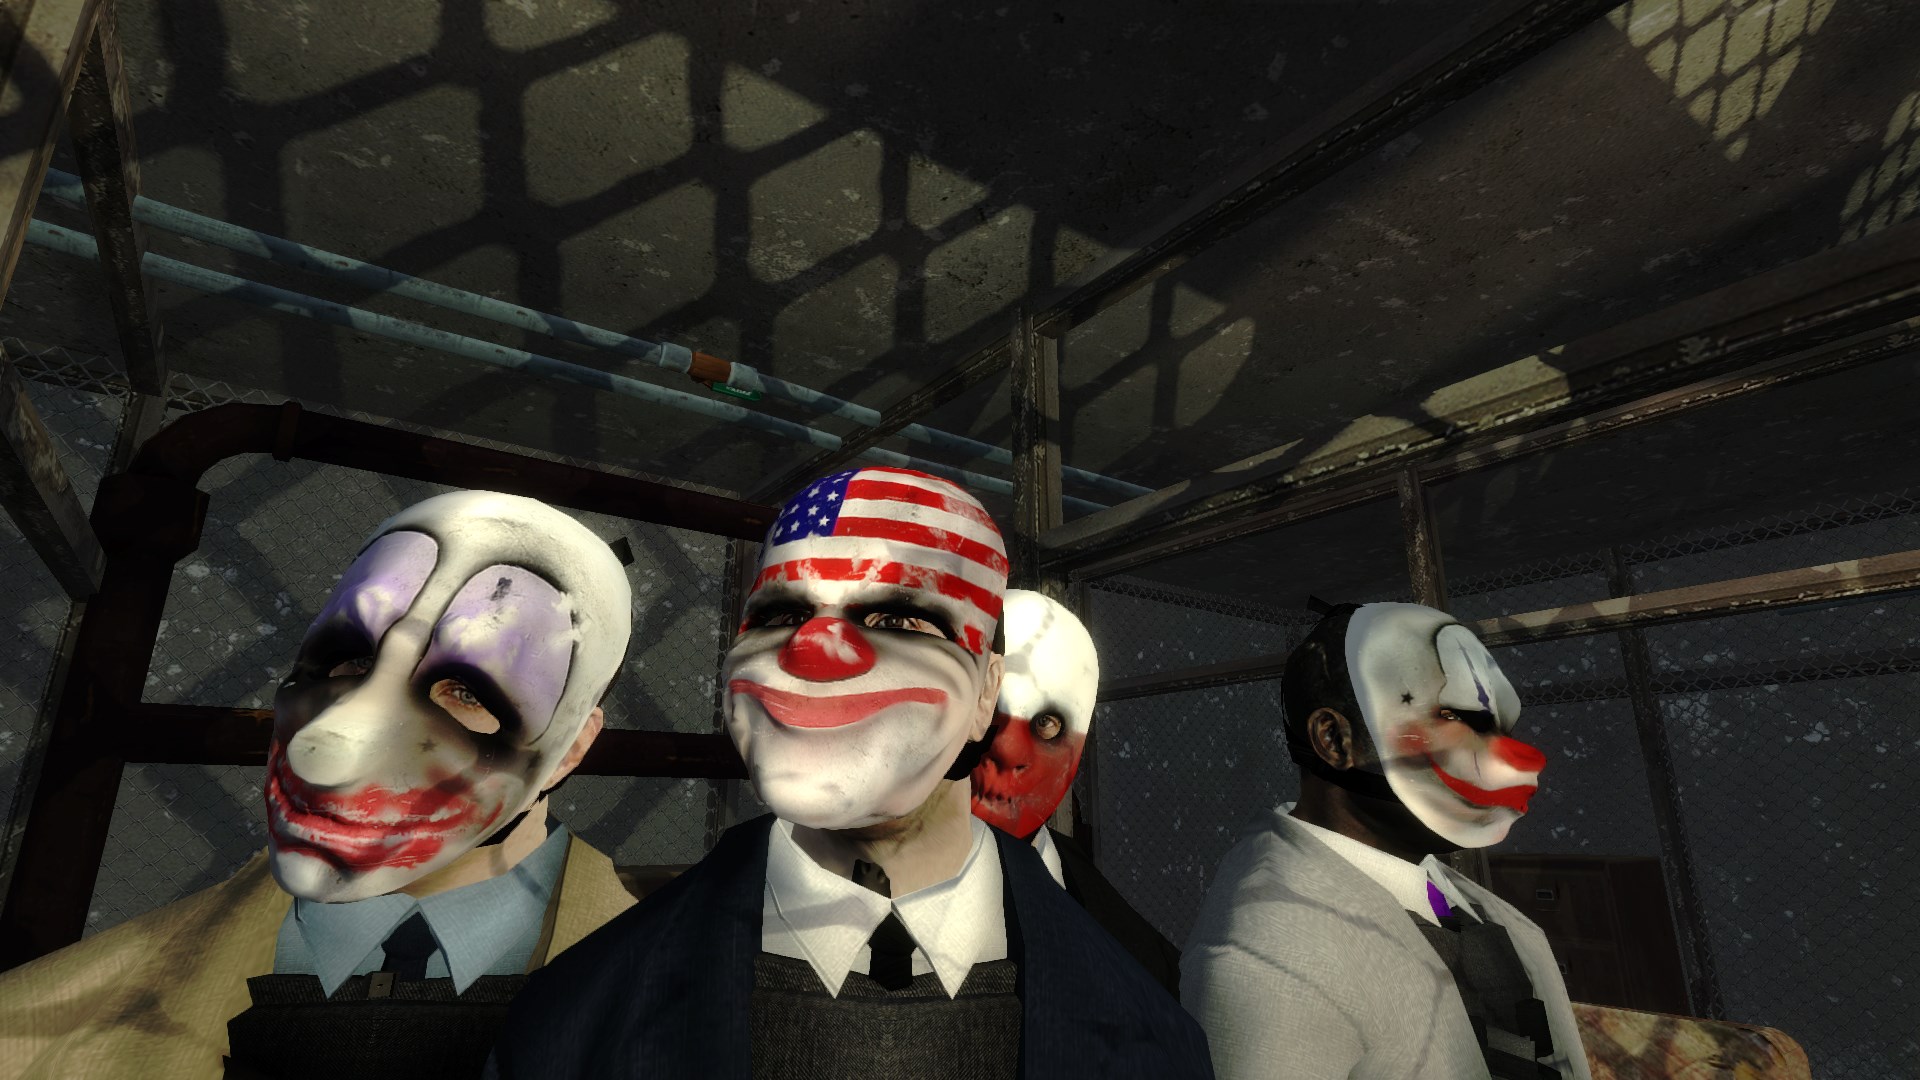 payday-the-heist-is-free-on-steam-for-the-next-24-hours-pc-gamer